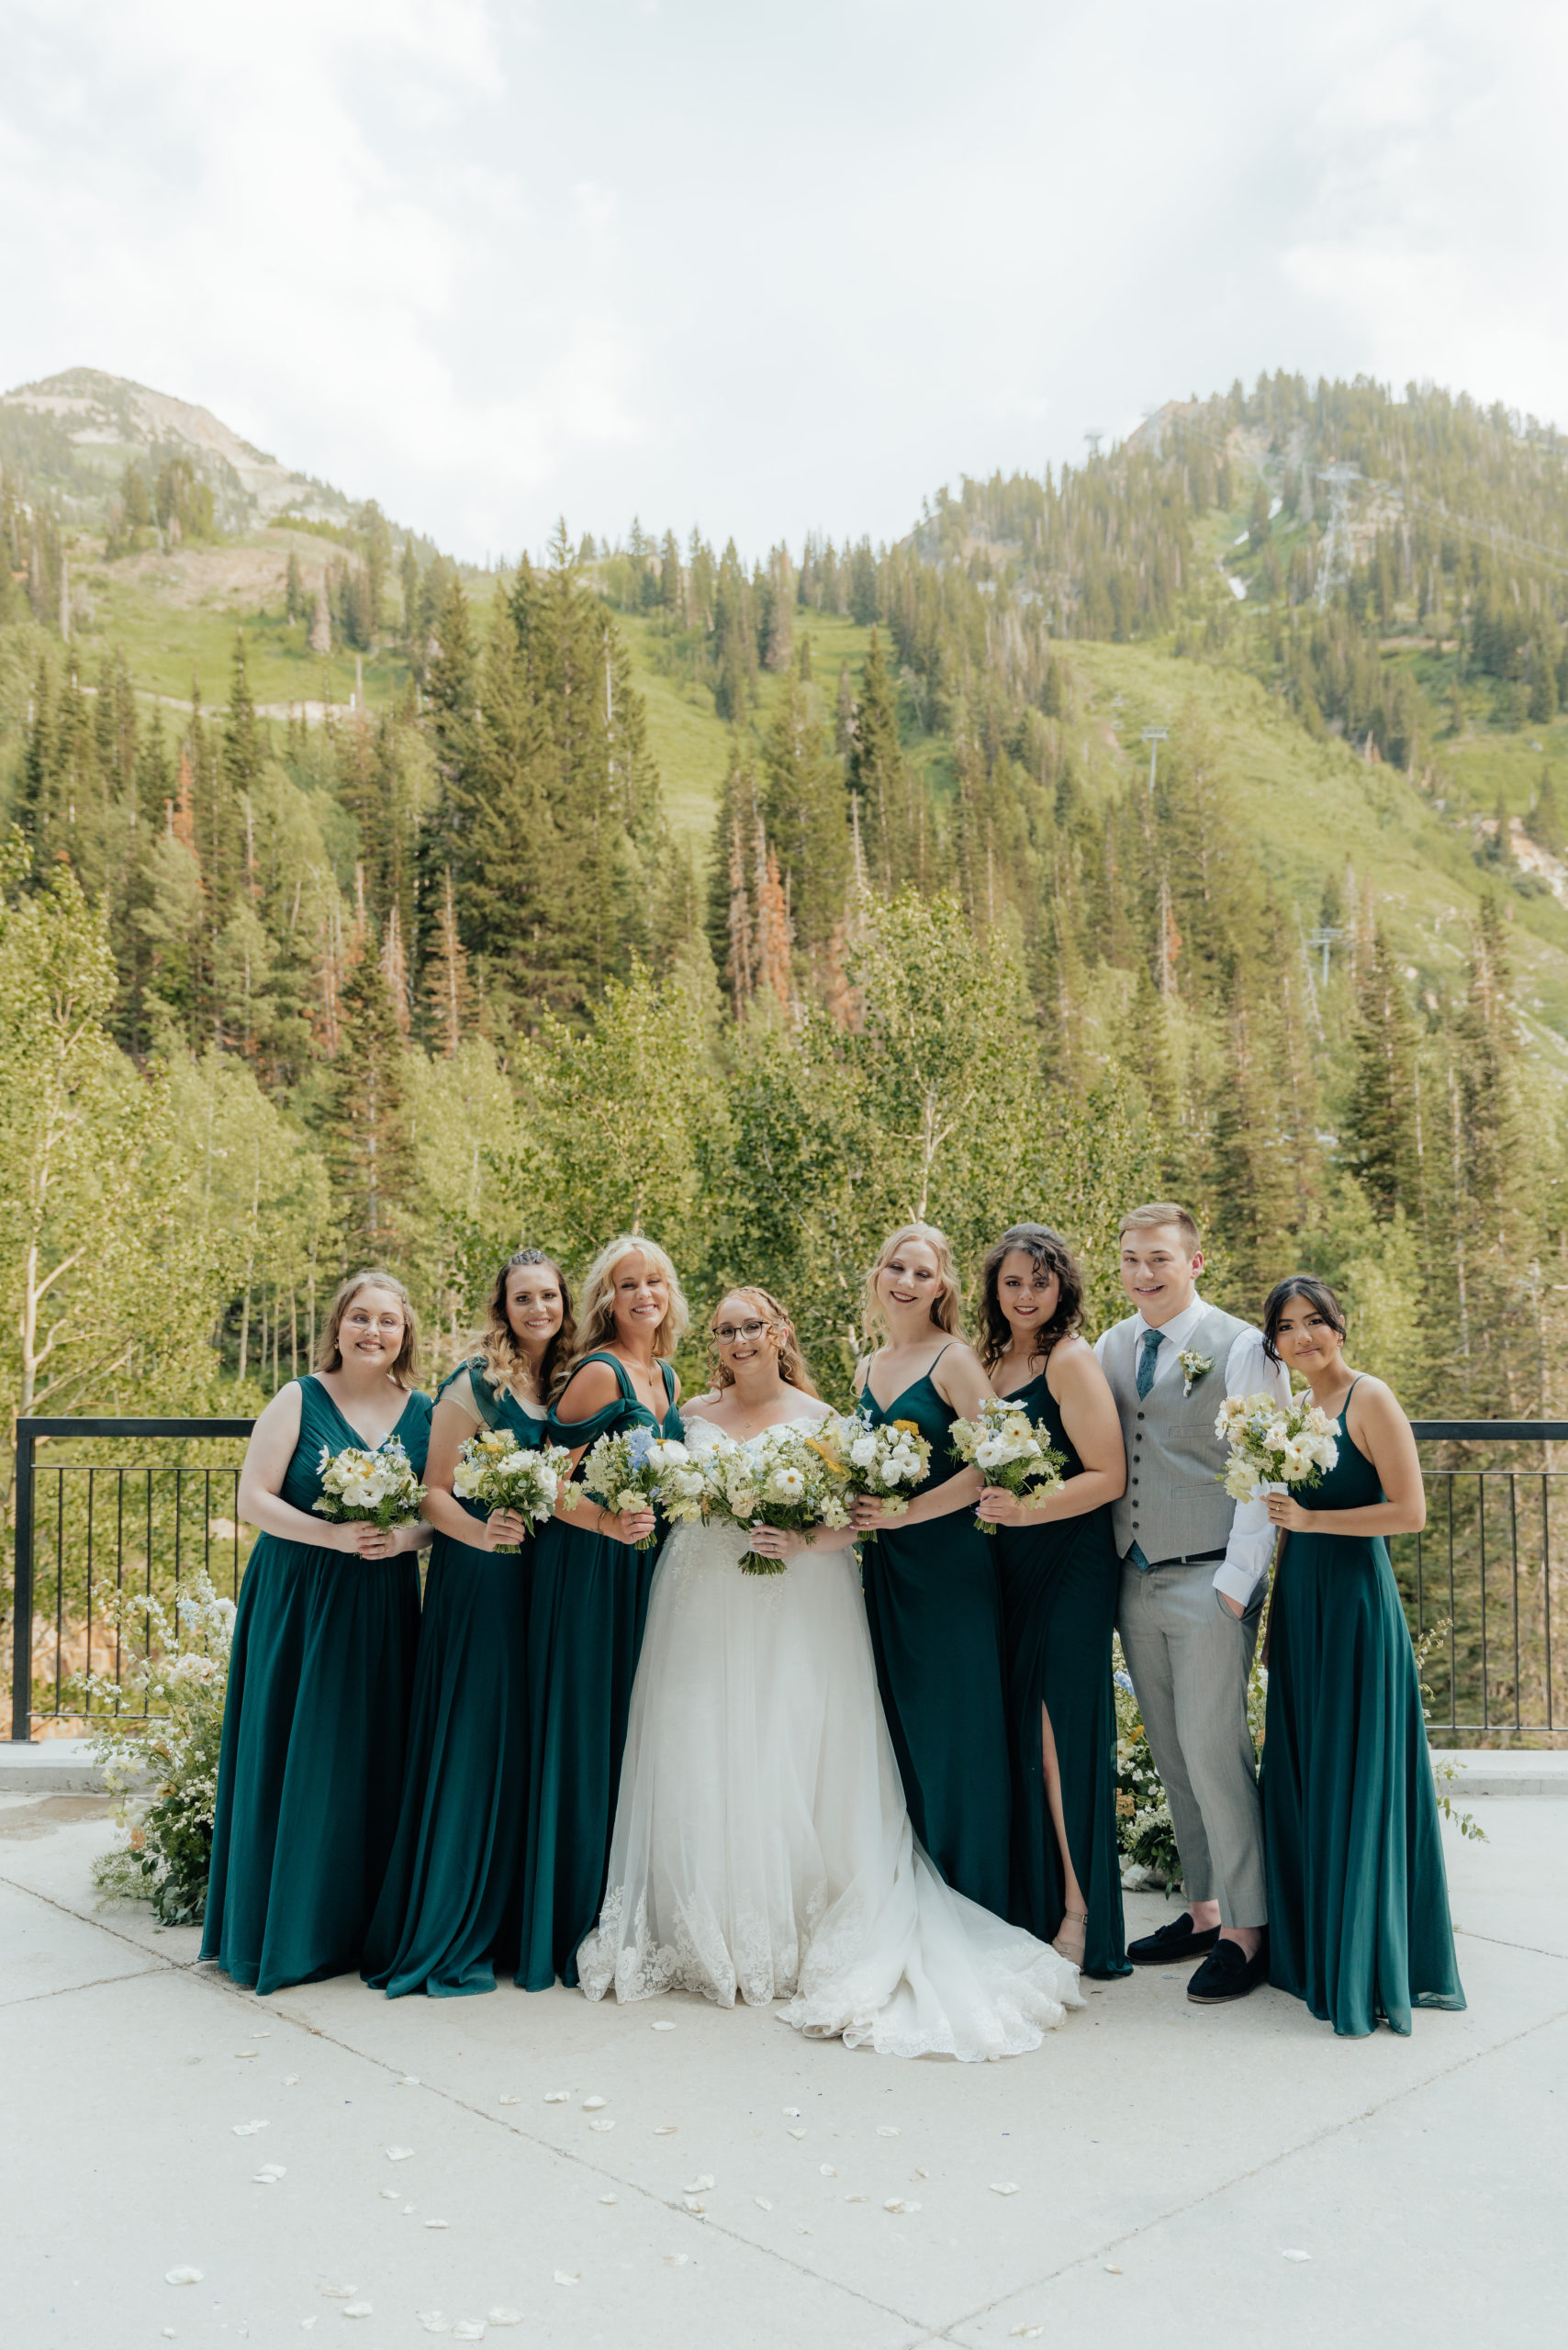 A wedding party of girls in deep green dresses and one guy in a grey suite, smiles for the camera while standing in front of a nest of wildflowers and mountain trees as their backdrop.